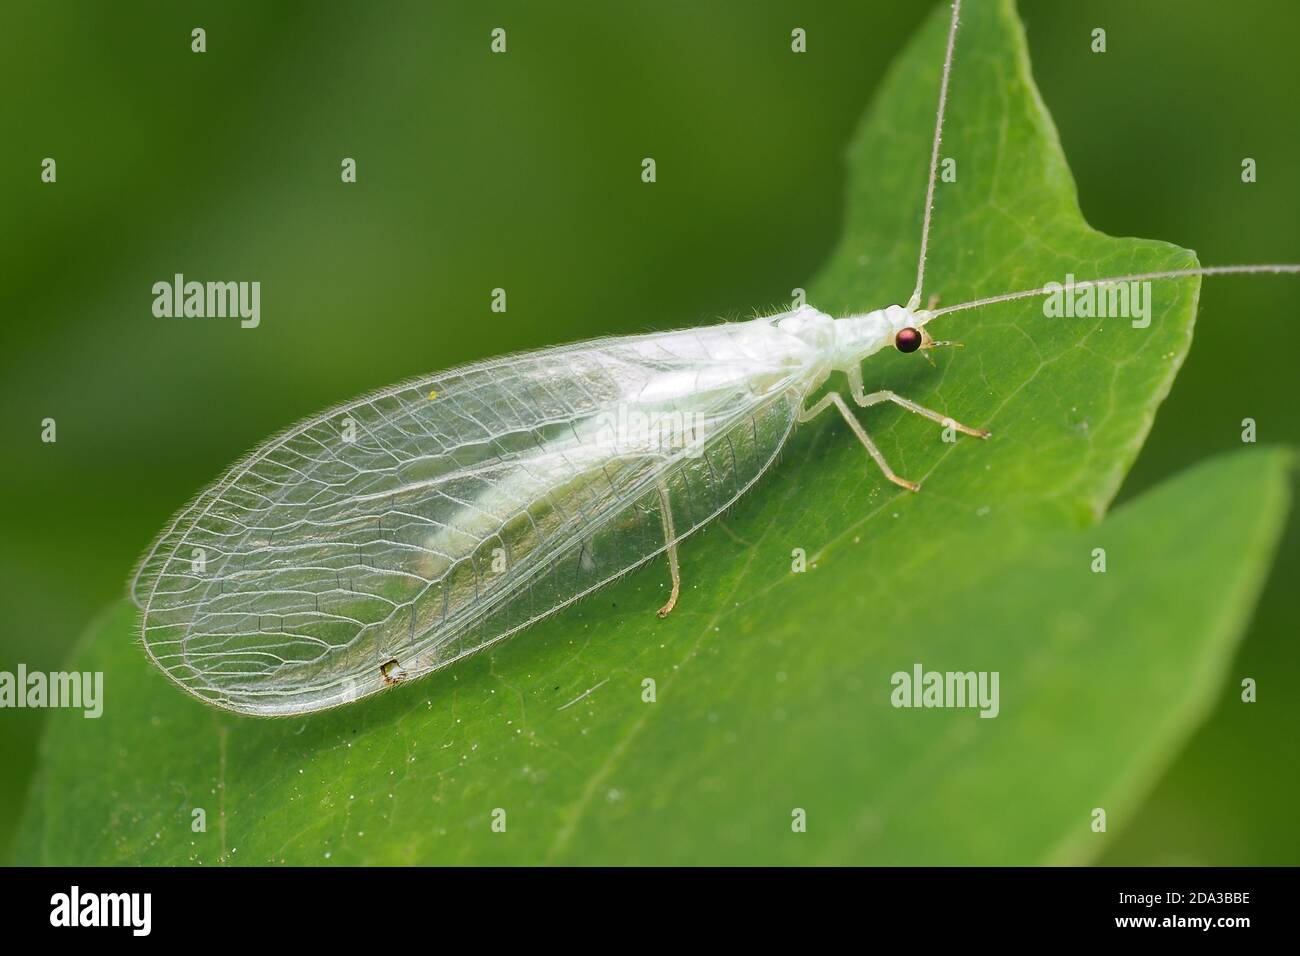 Freshly emerged Green Lacewing at rest on ivy leaf. Tipperary,Ireland Stock Photo